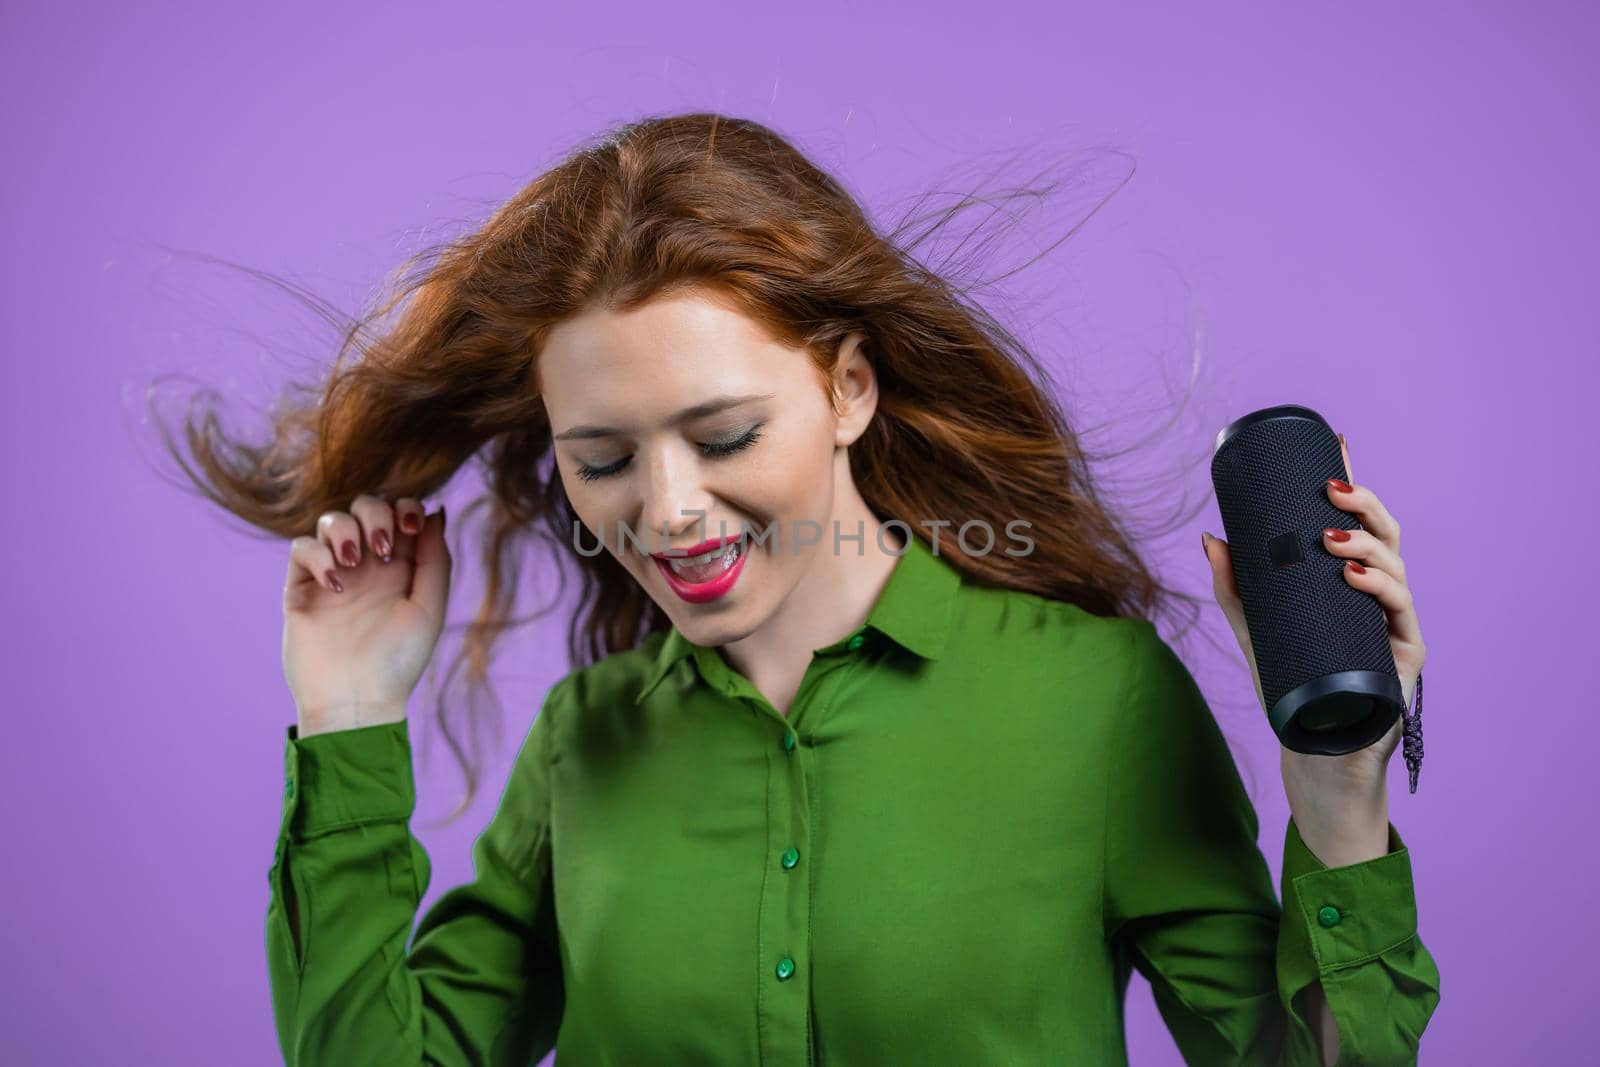 Woman listening to music by wireless portable speaker - modern sound system. Lady dancing, enjoying on violet studio background. She moves to the rhythm of music. by kristina_kokhanova